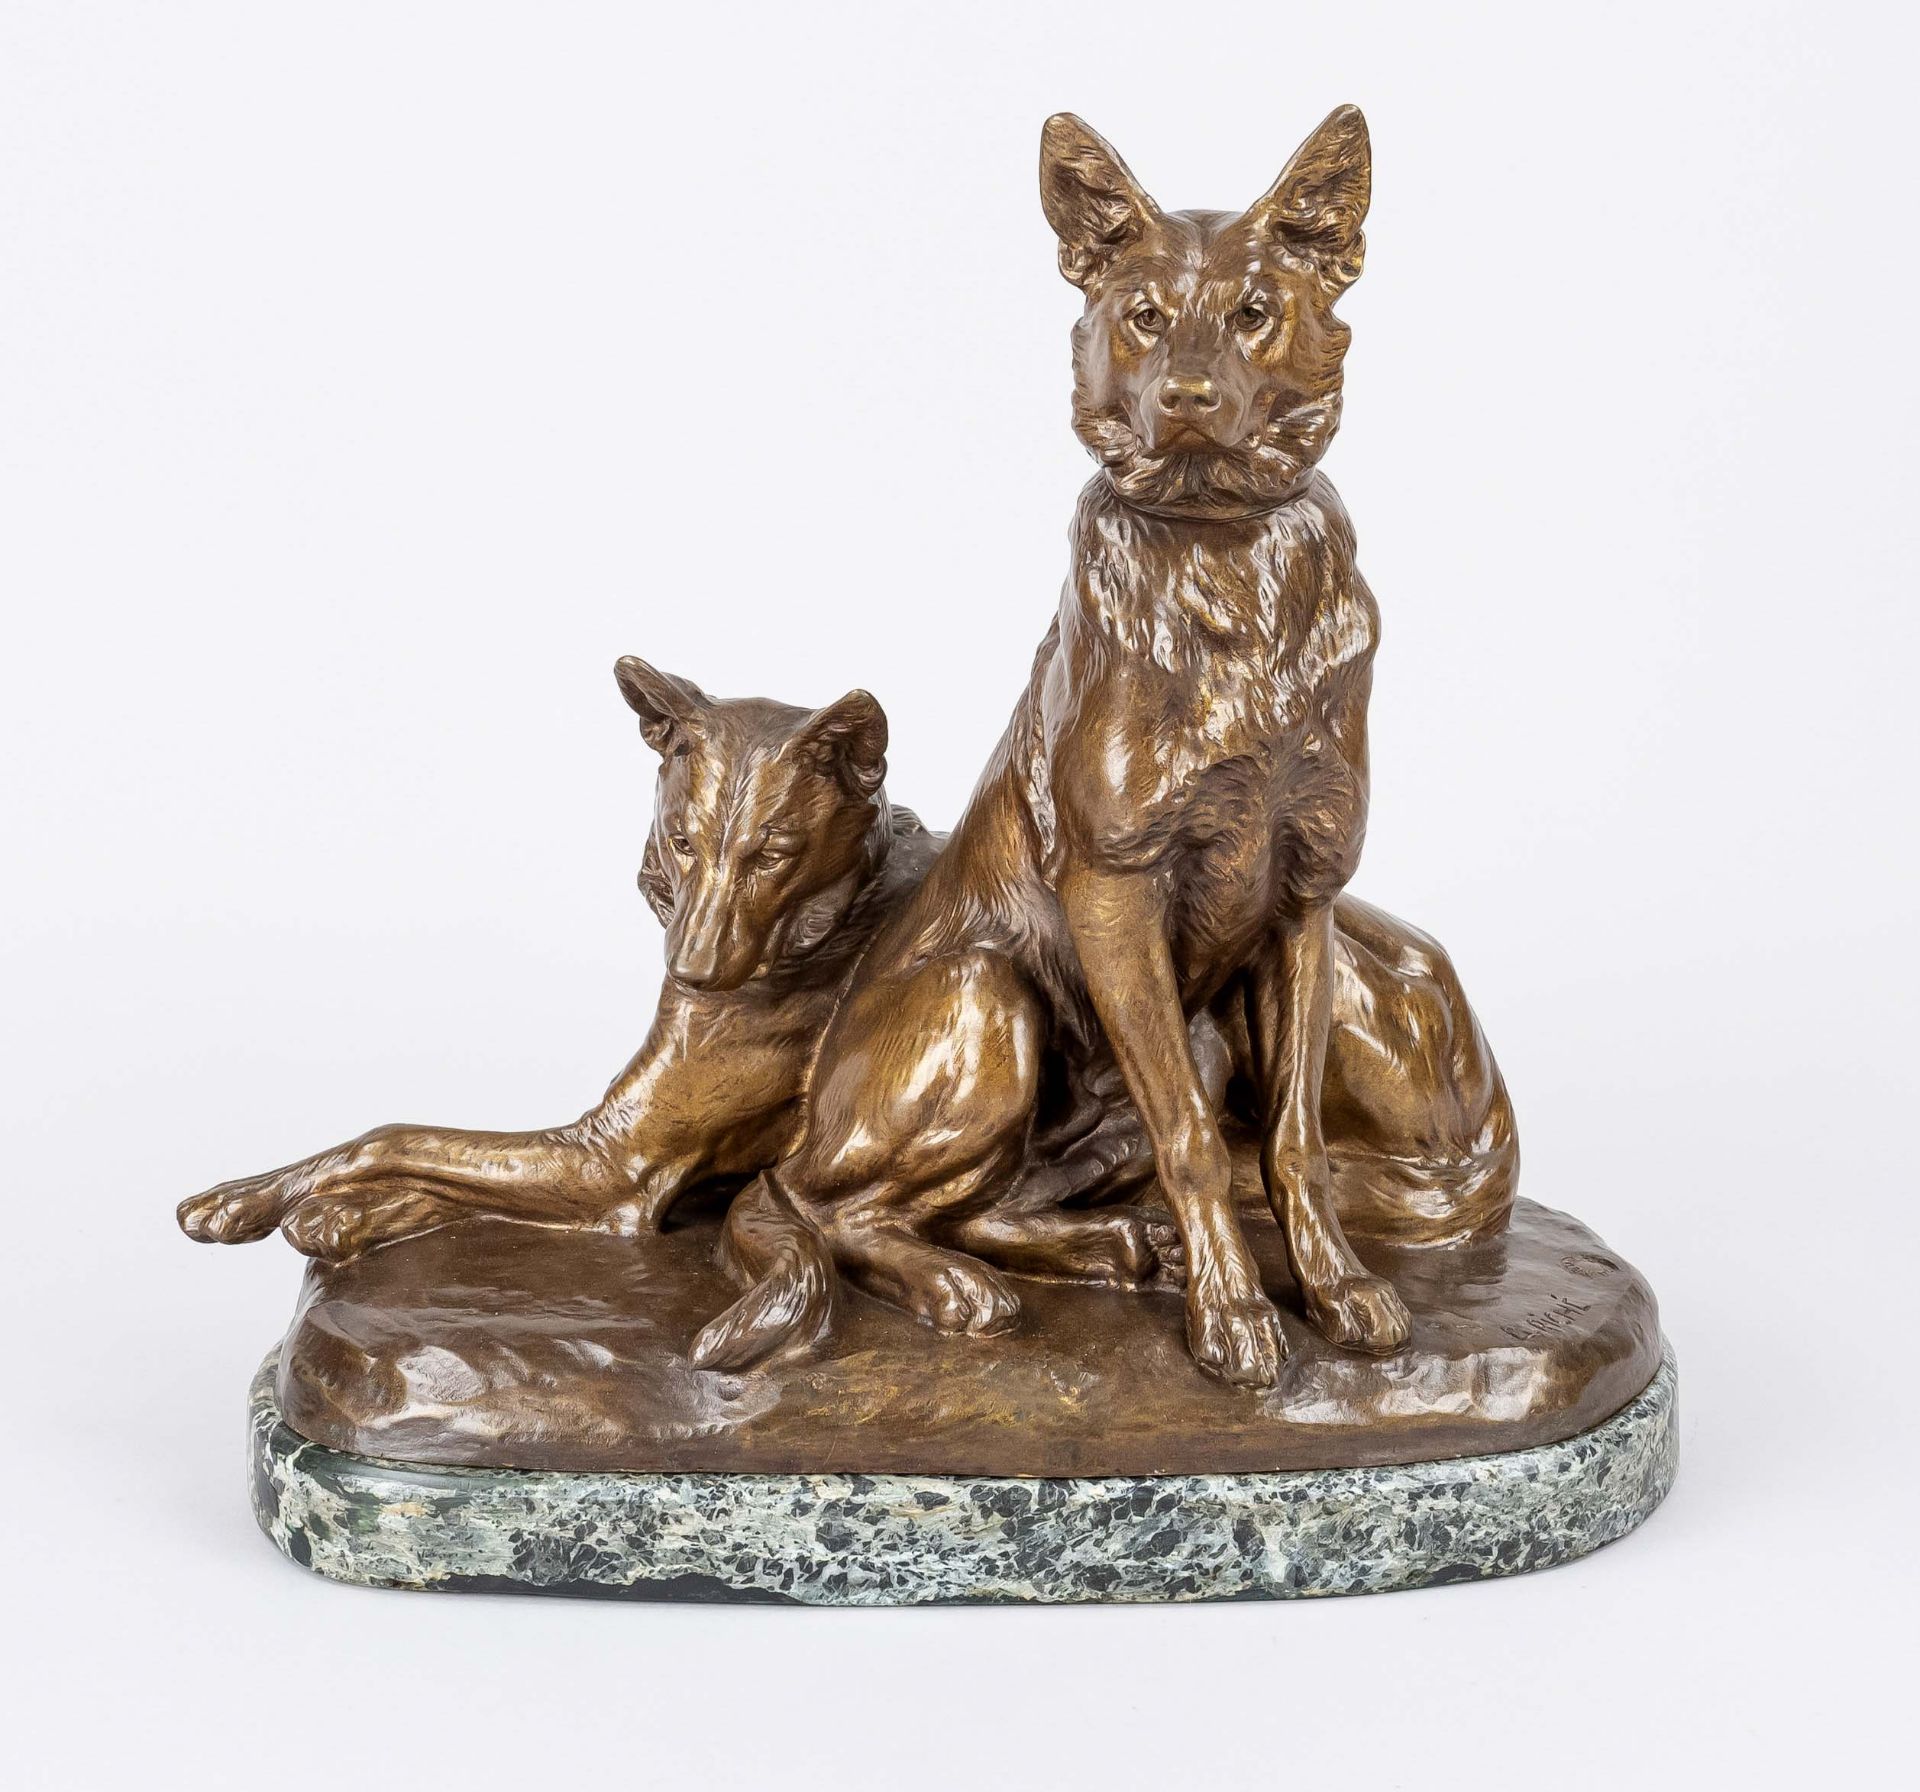 Louis Riché (1877-1949), French sculptor, large group of two shepherd dogs, gold-brown patinated